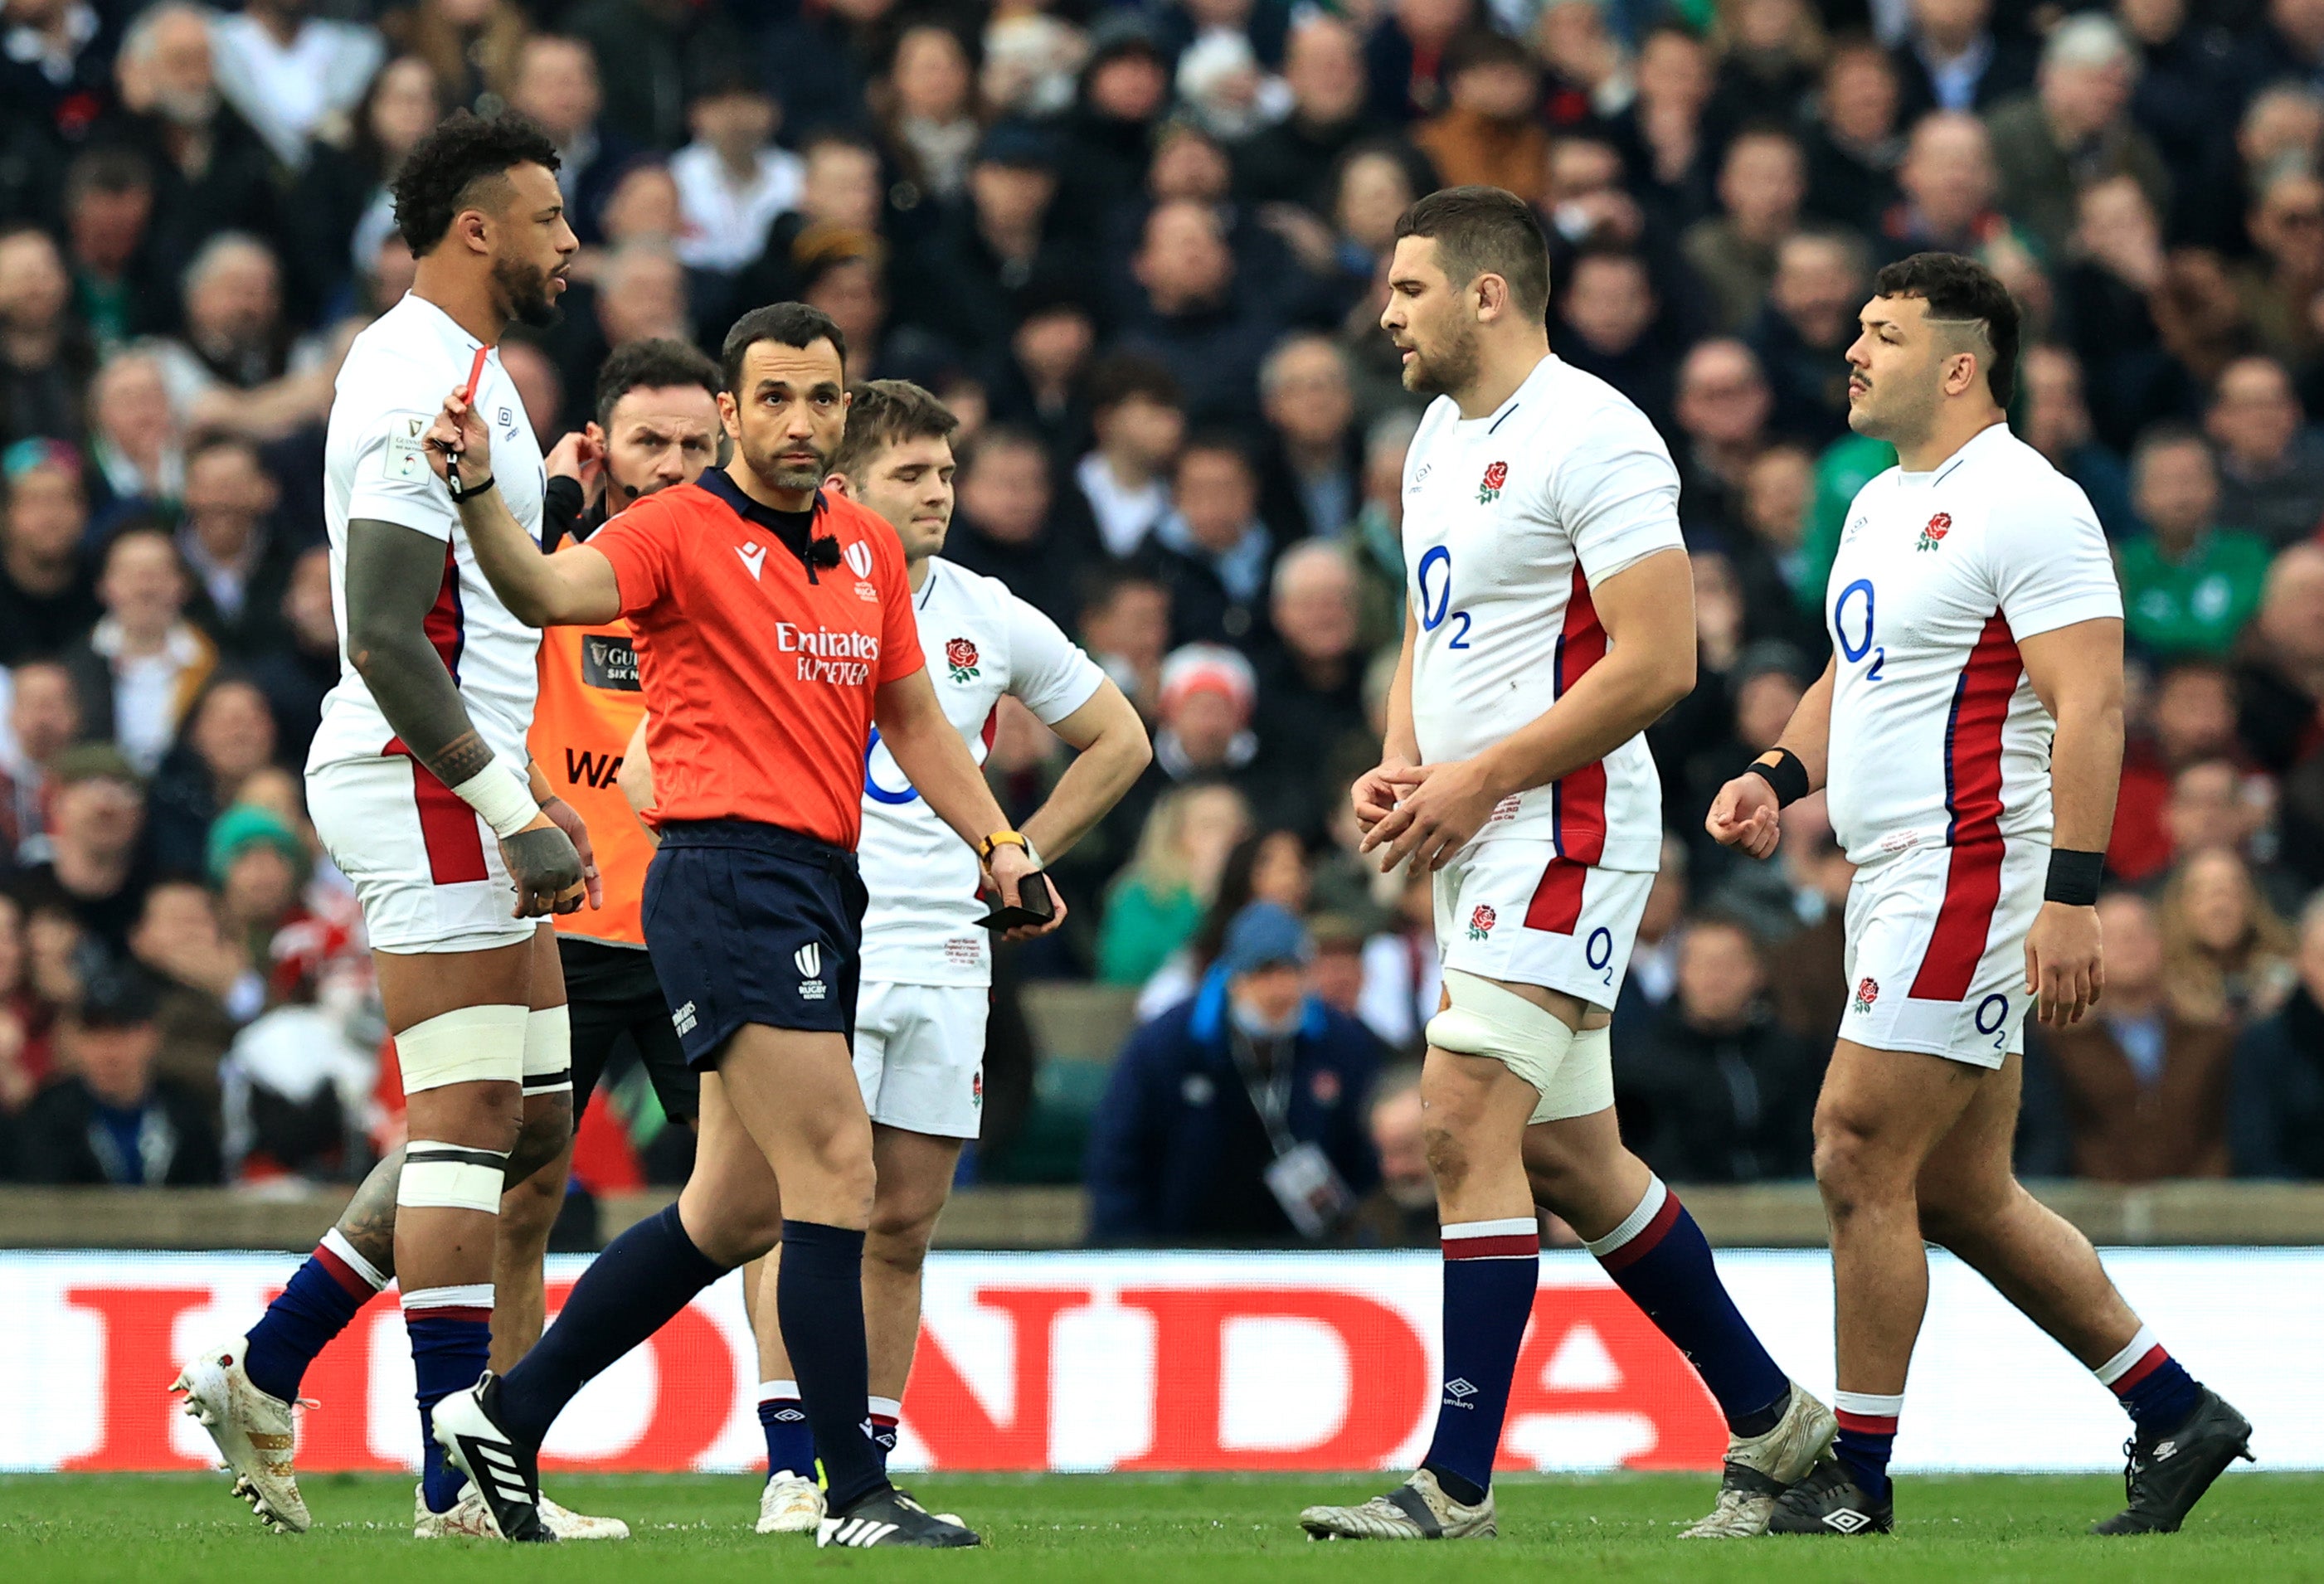 An early red card for Charlie Ewels at Twickenham cost England dearly